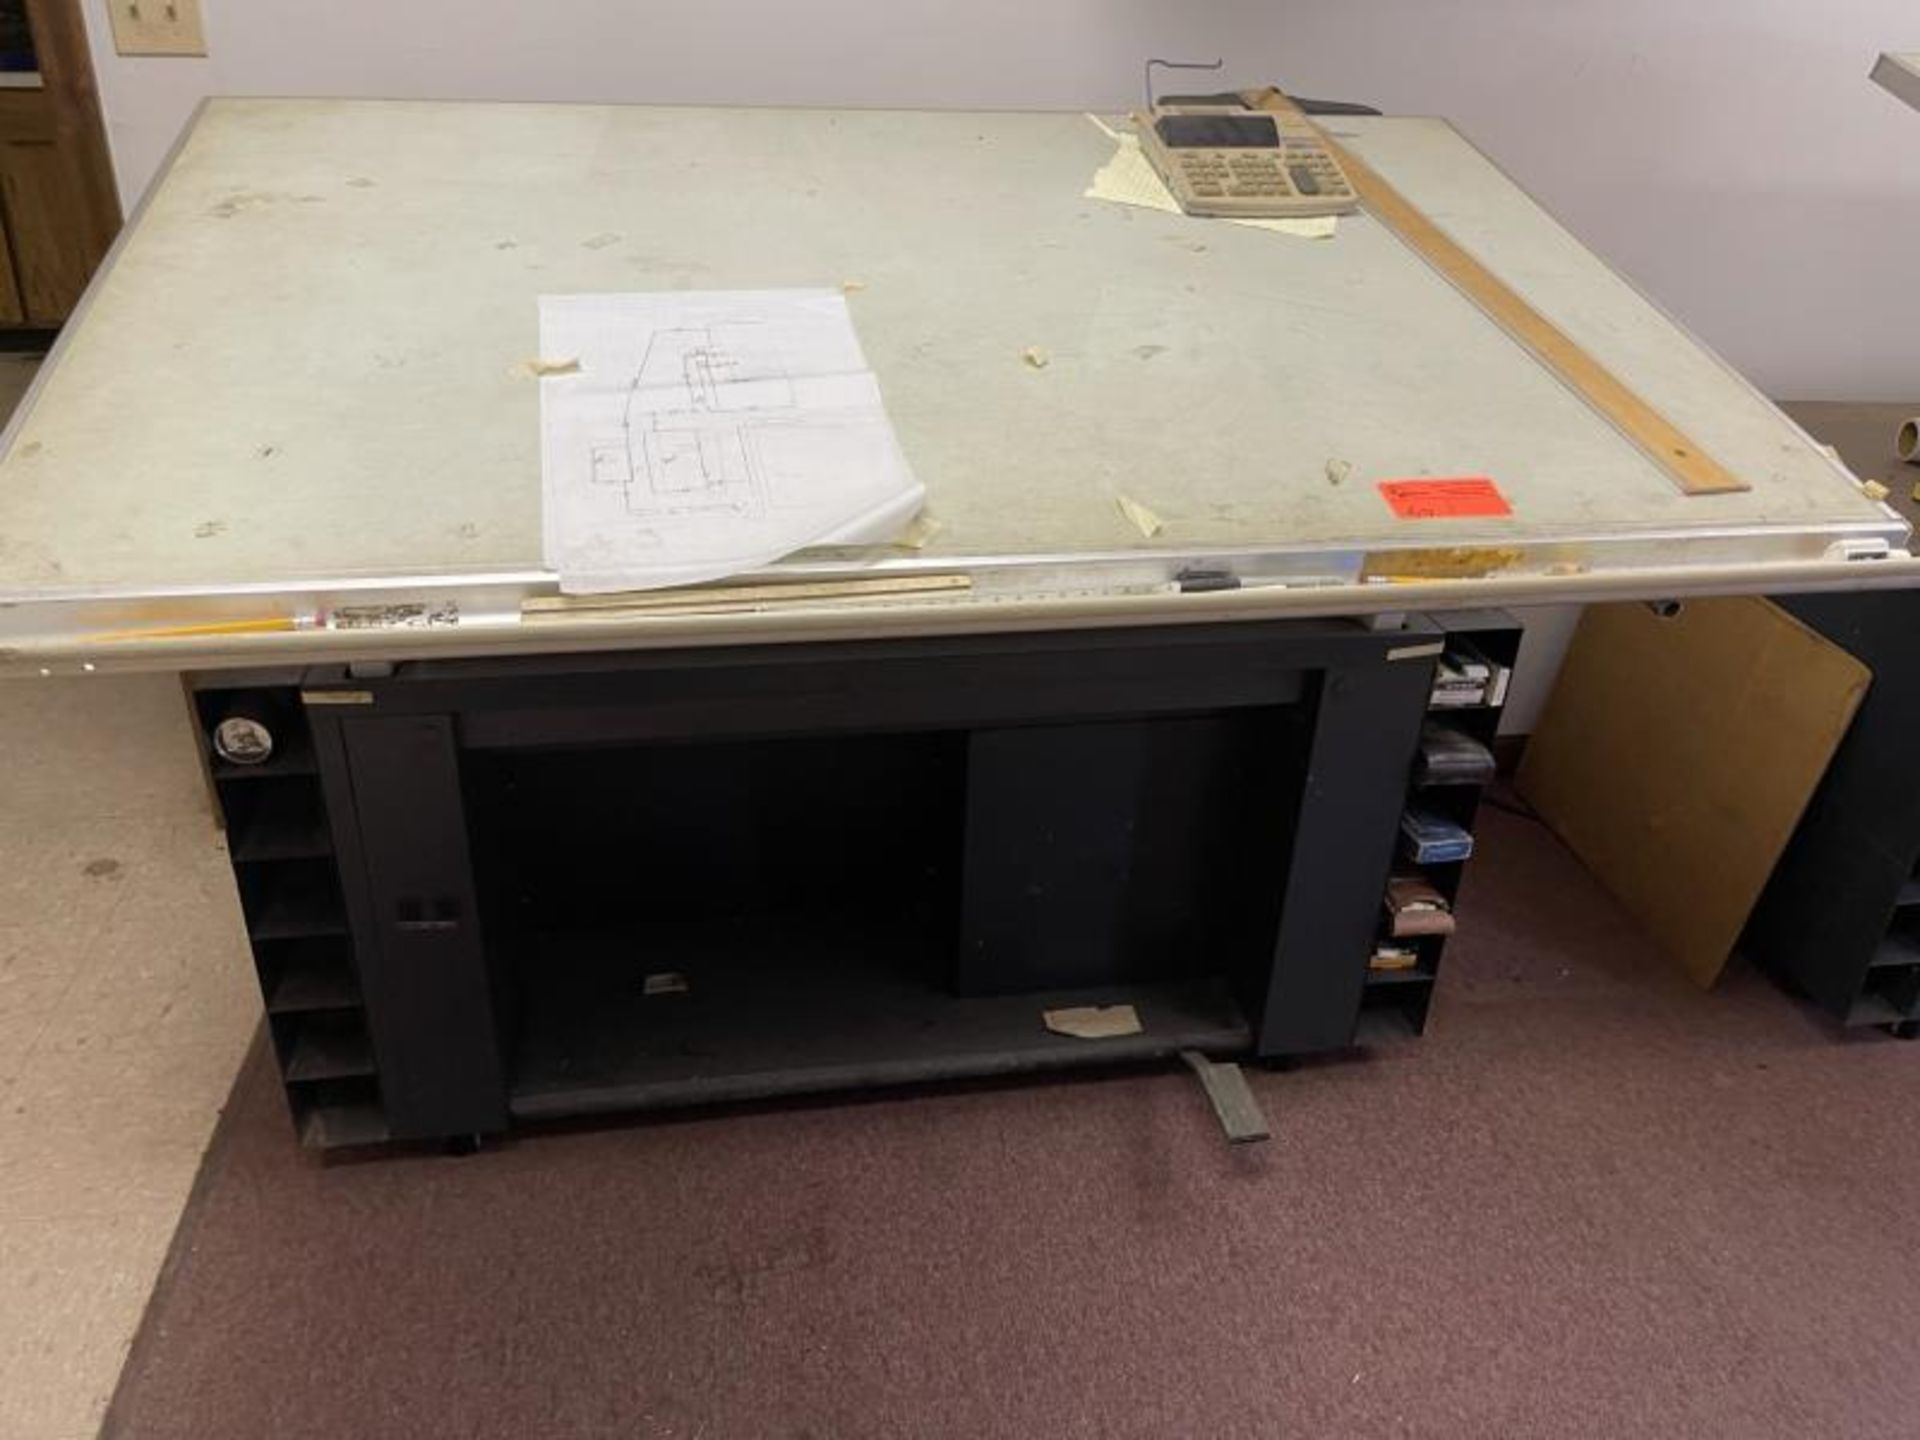 Lot of 2 drafting tables - Image 2 of 3